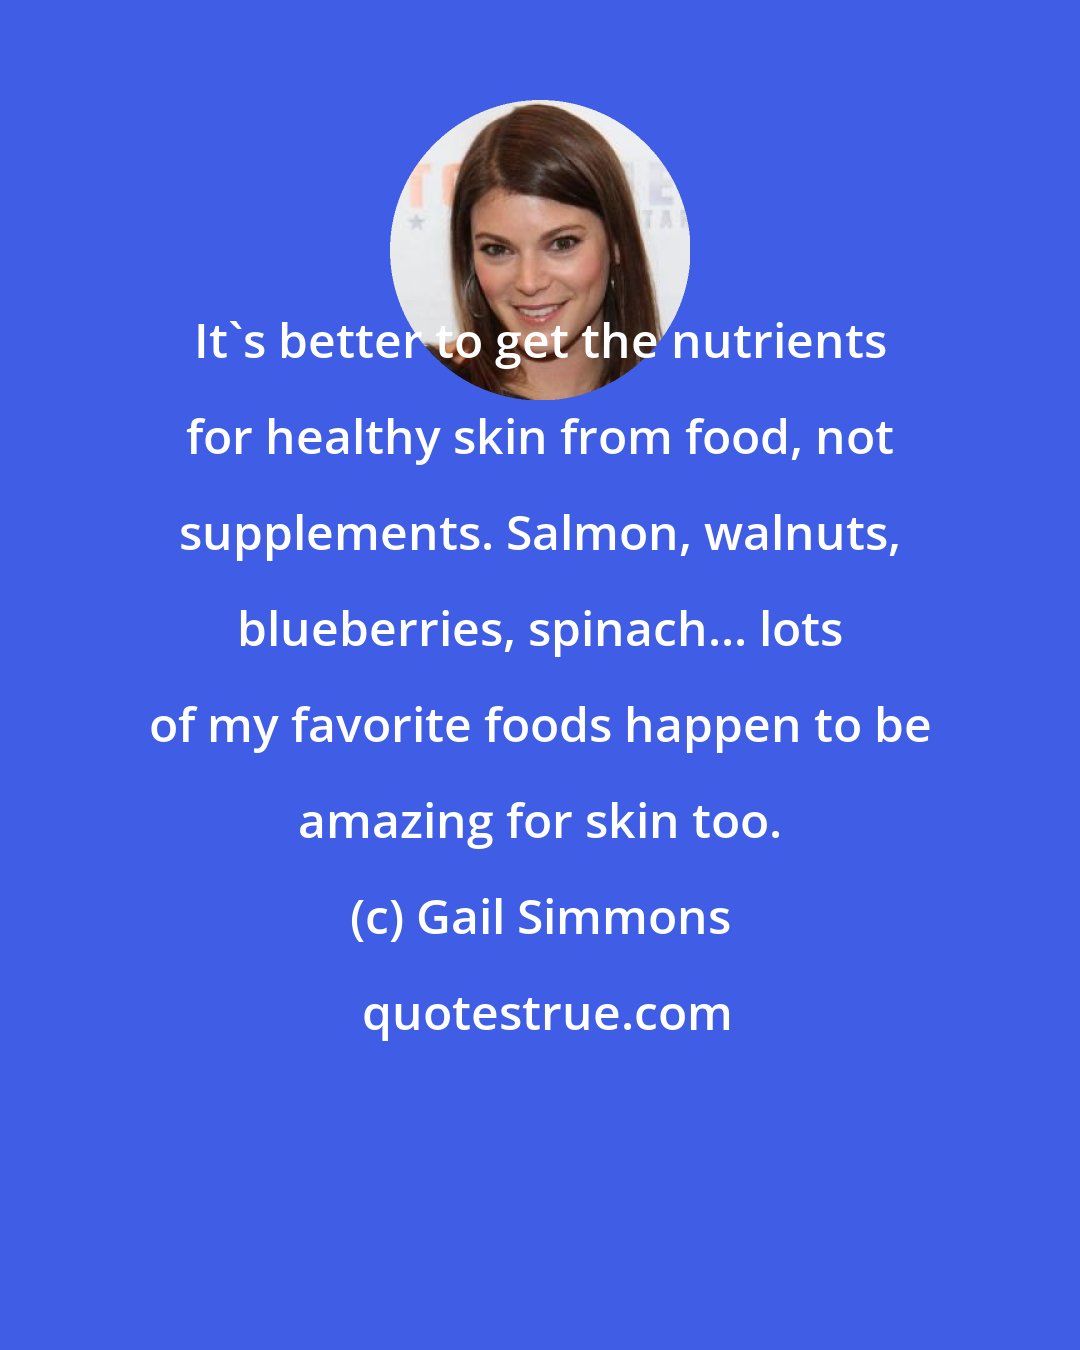 Gail Simmons: It's better to get the nutrients for healthy skin from food, not supplements. Salmon, walnuts, blueberries, spinach... lots of my favorite foods happen to be amazing for skin too.